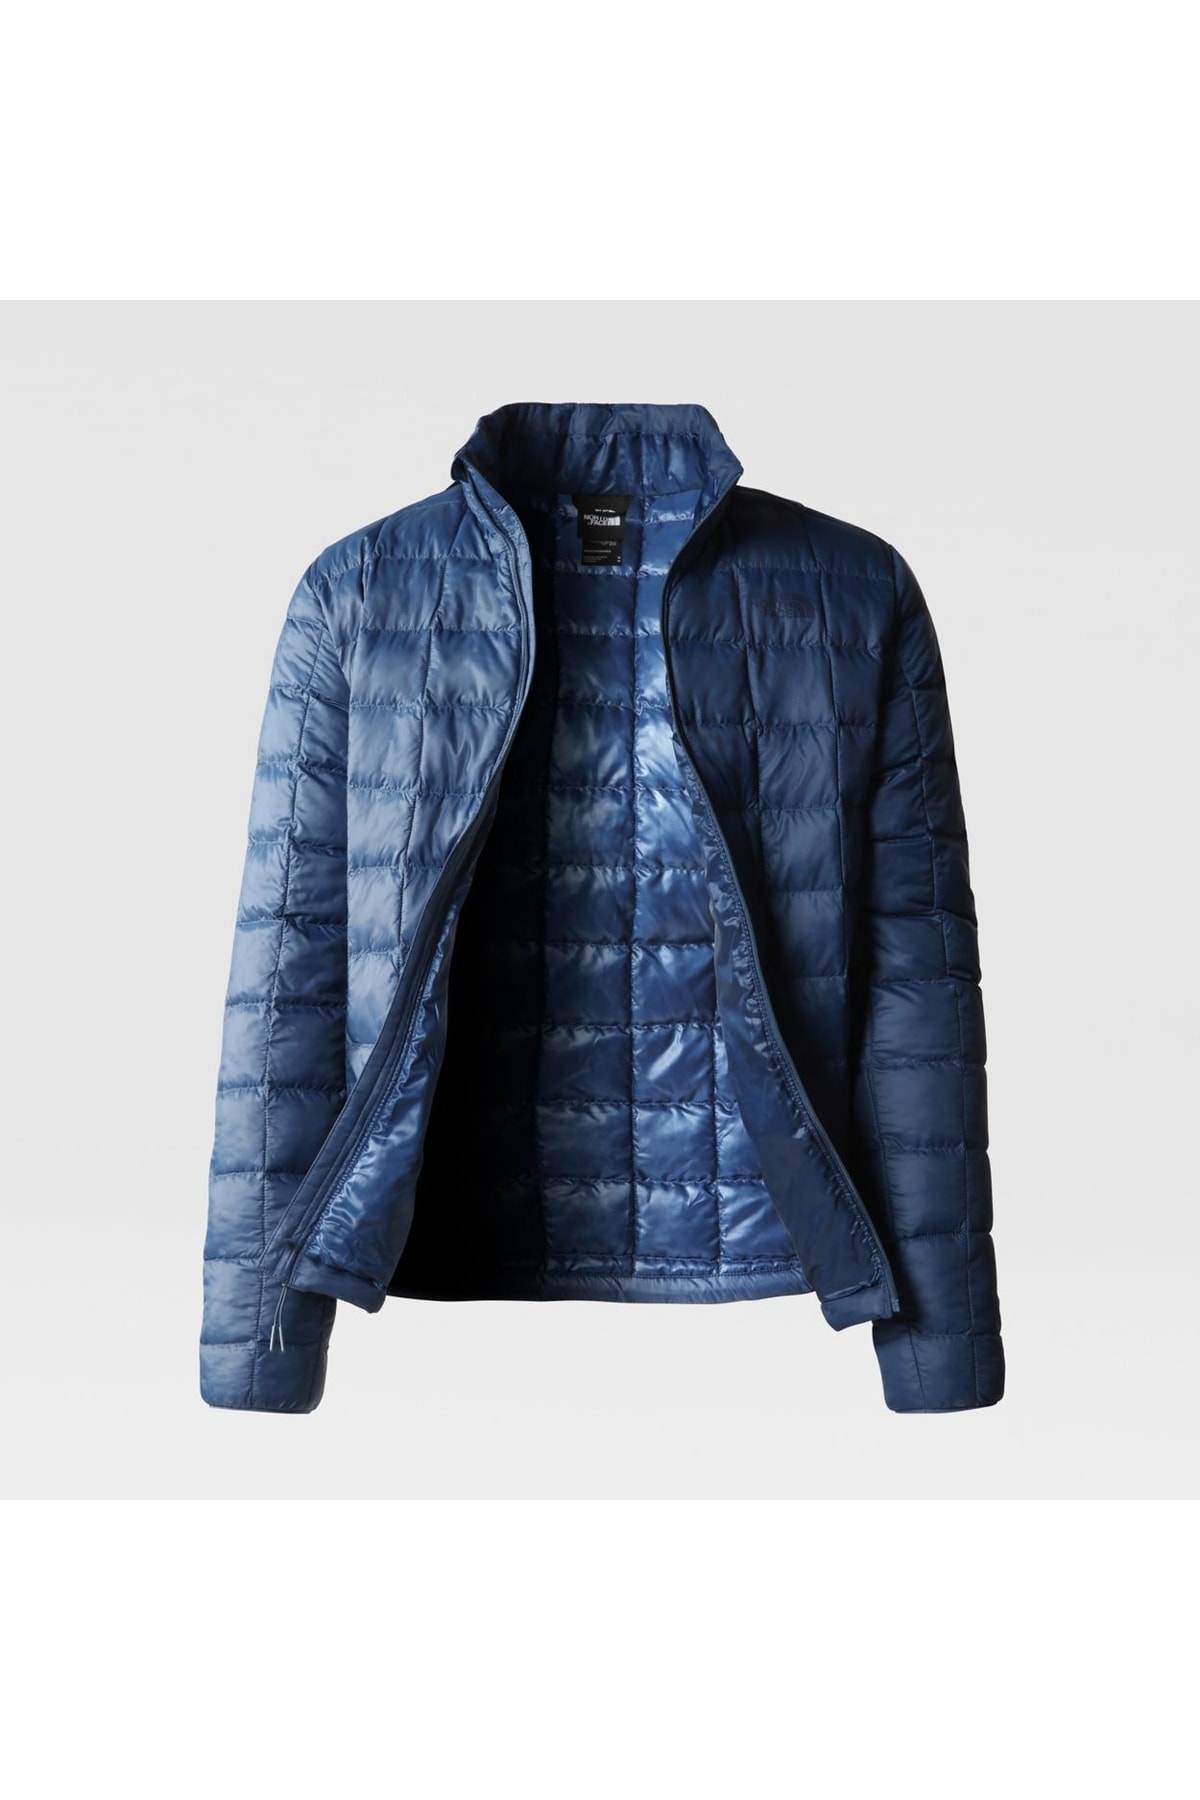 THE NORTH FACE M Thermoball Eco Jacket 2.0